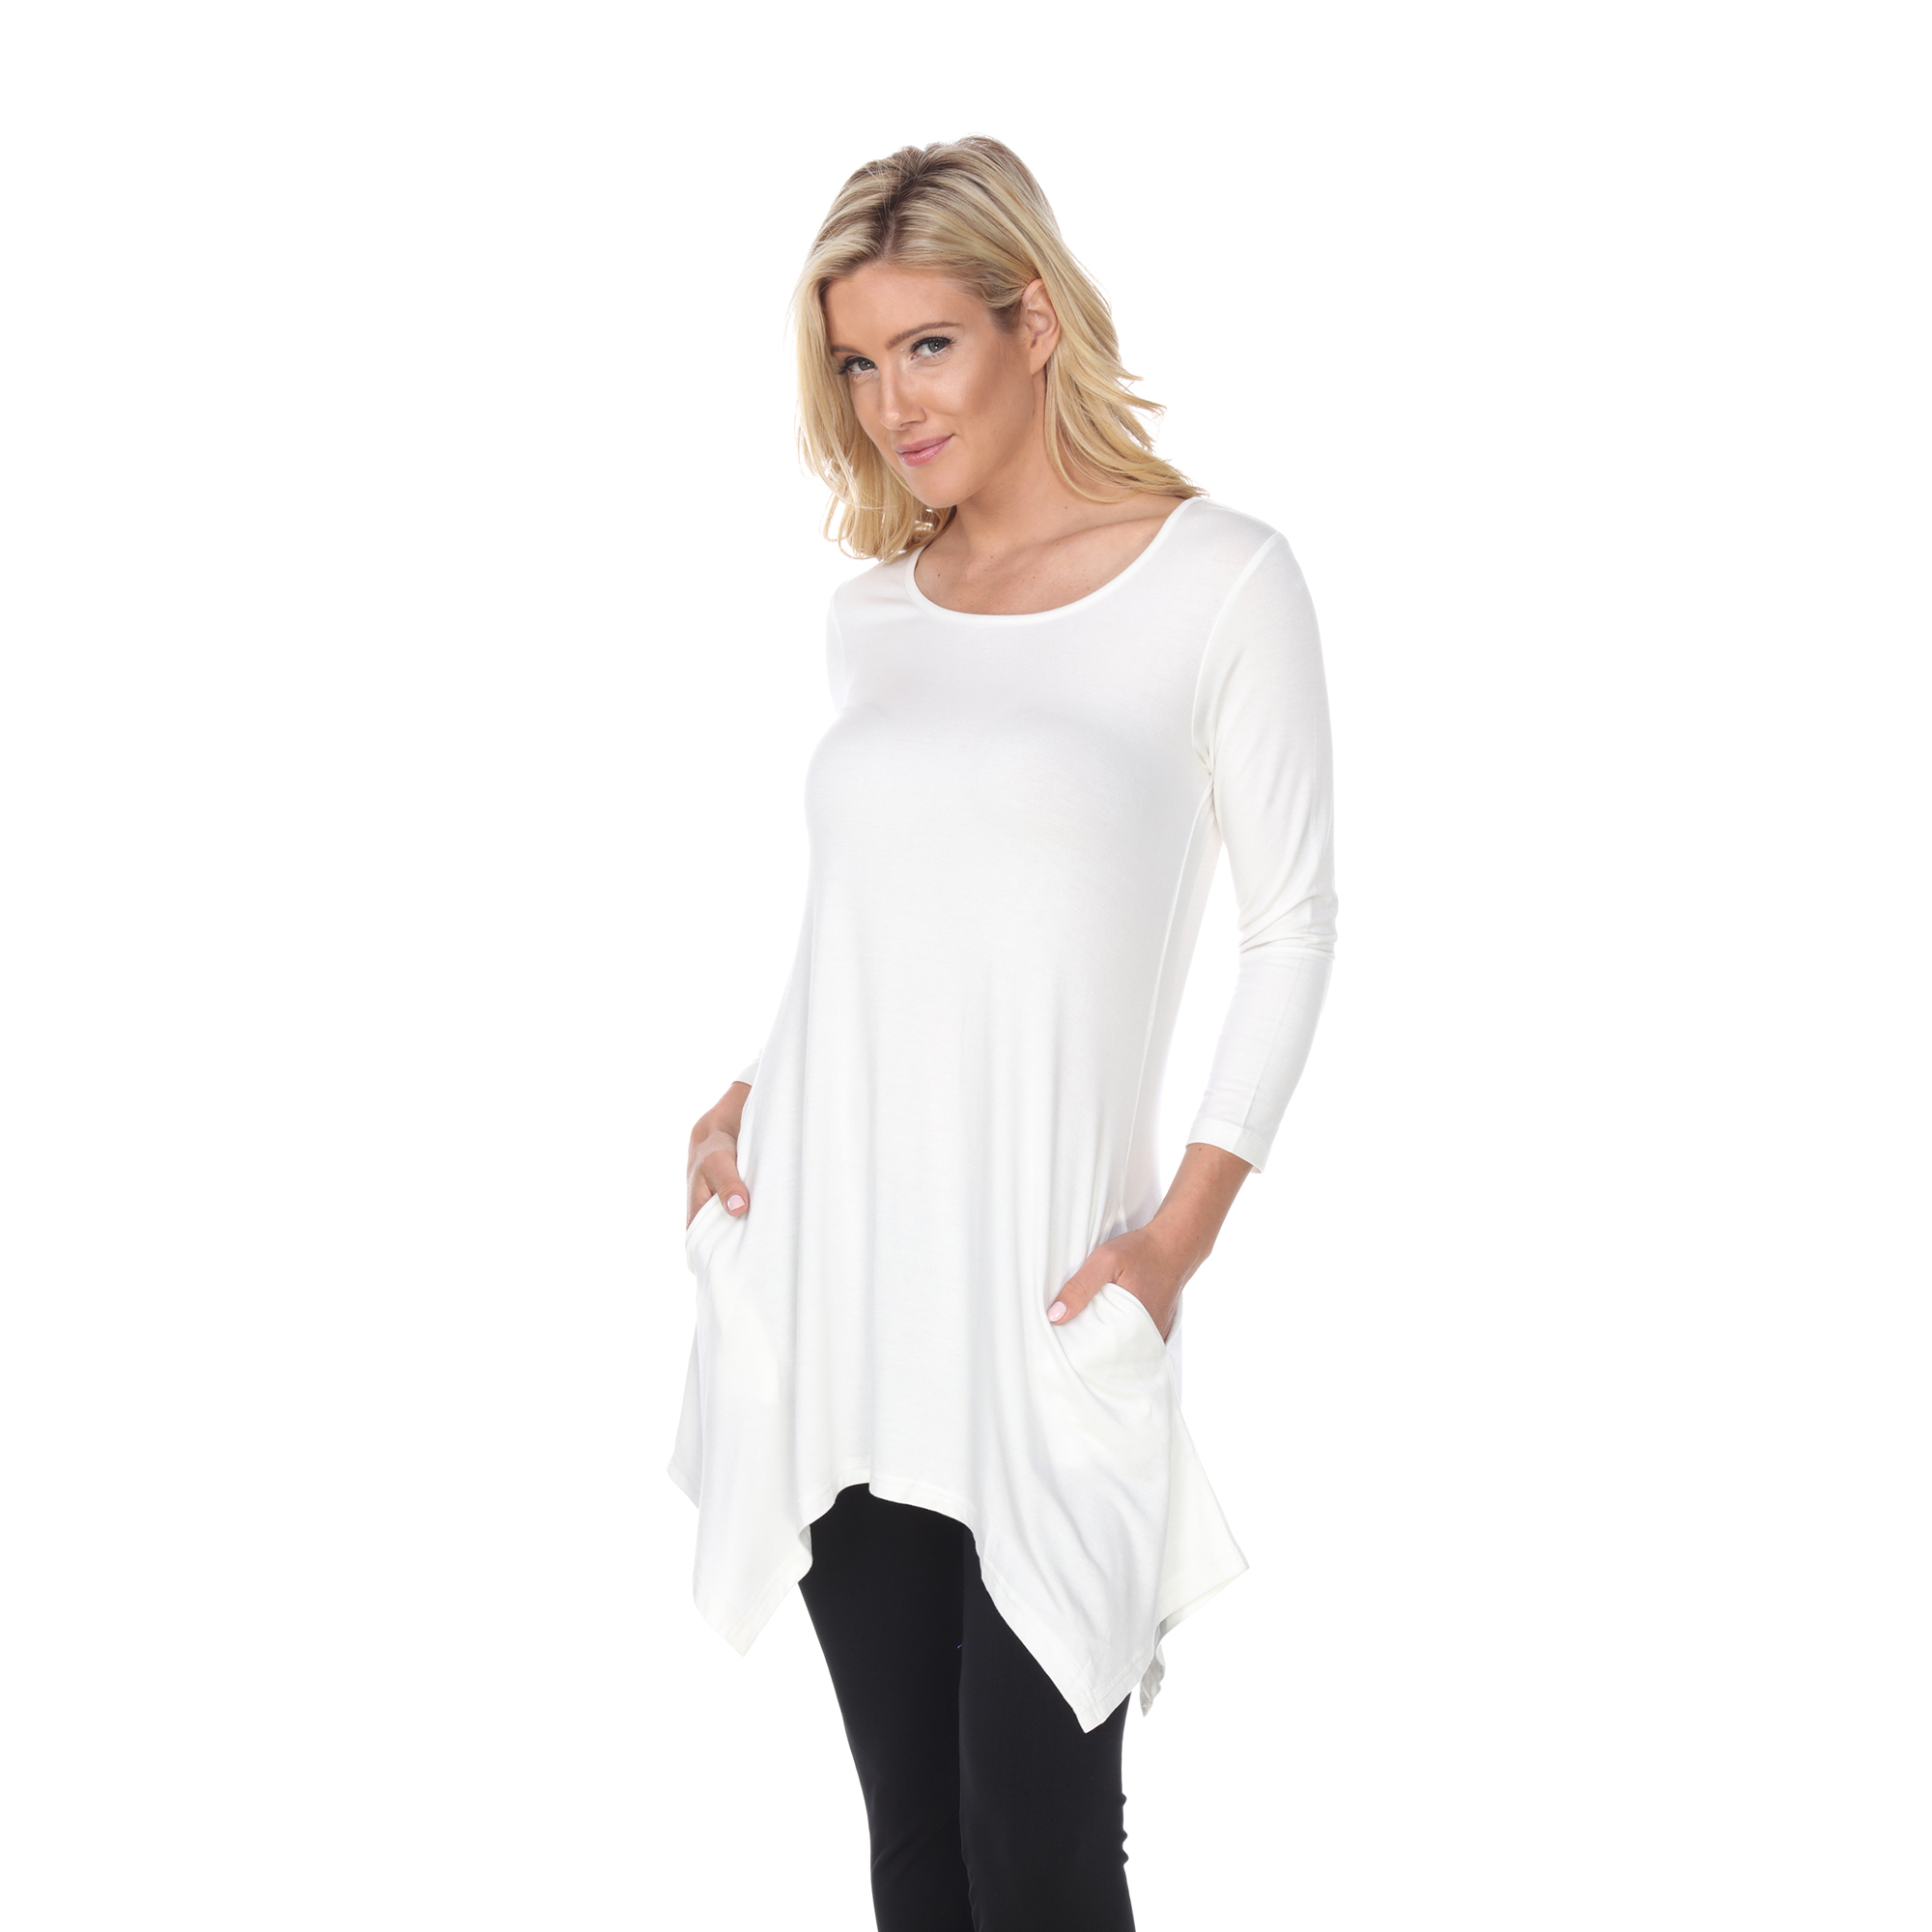 White Mark Women's Quarter Sleeve Tunic Top With Pockets - White, 3X